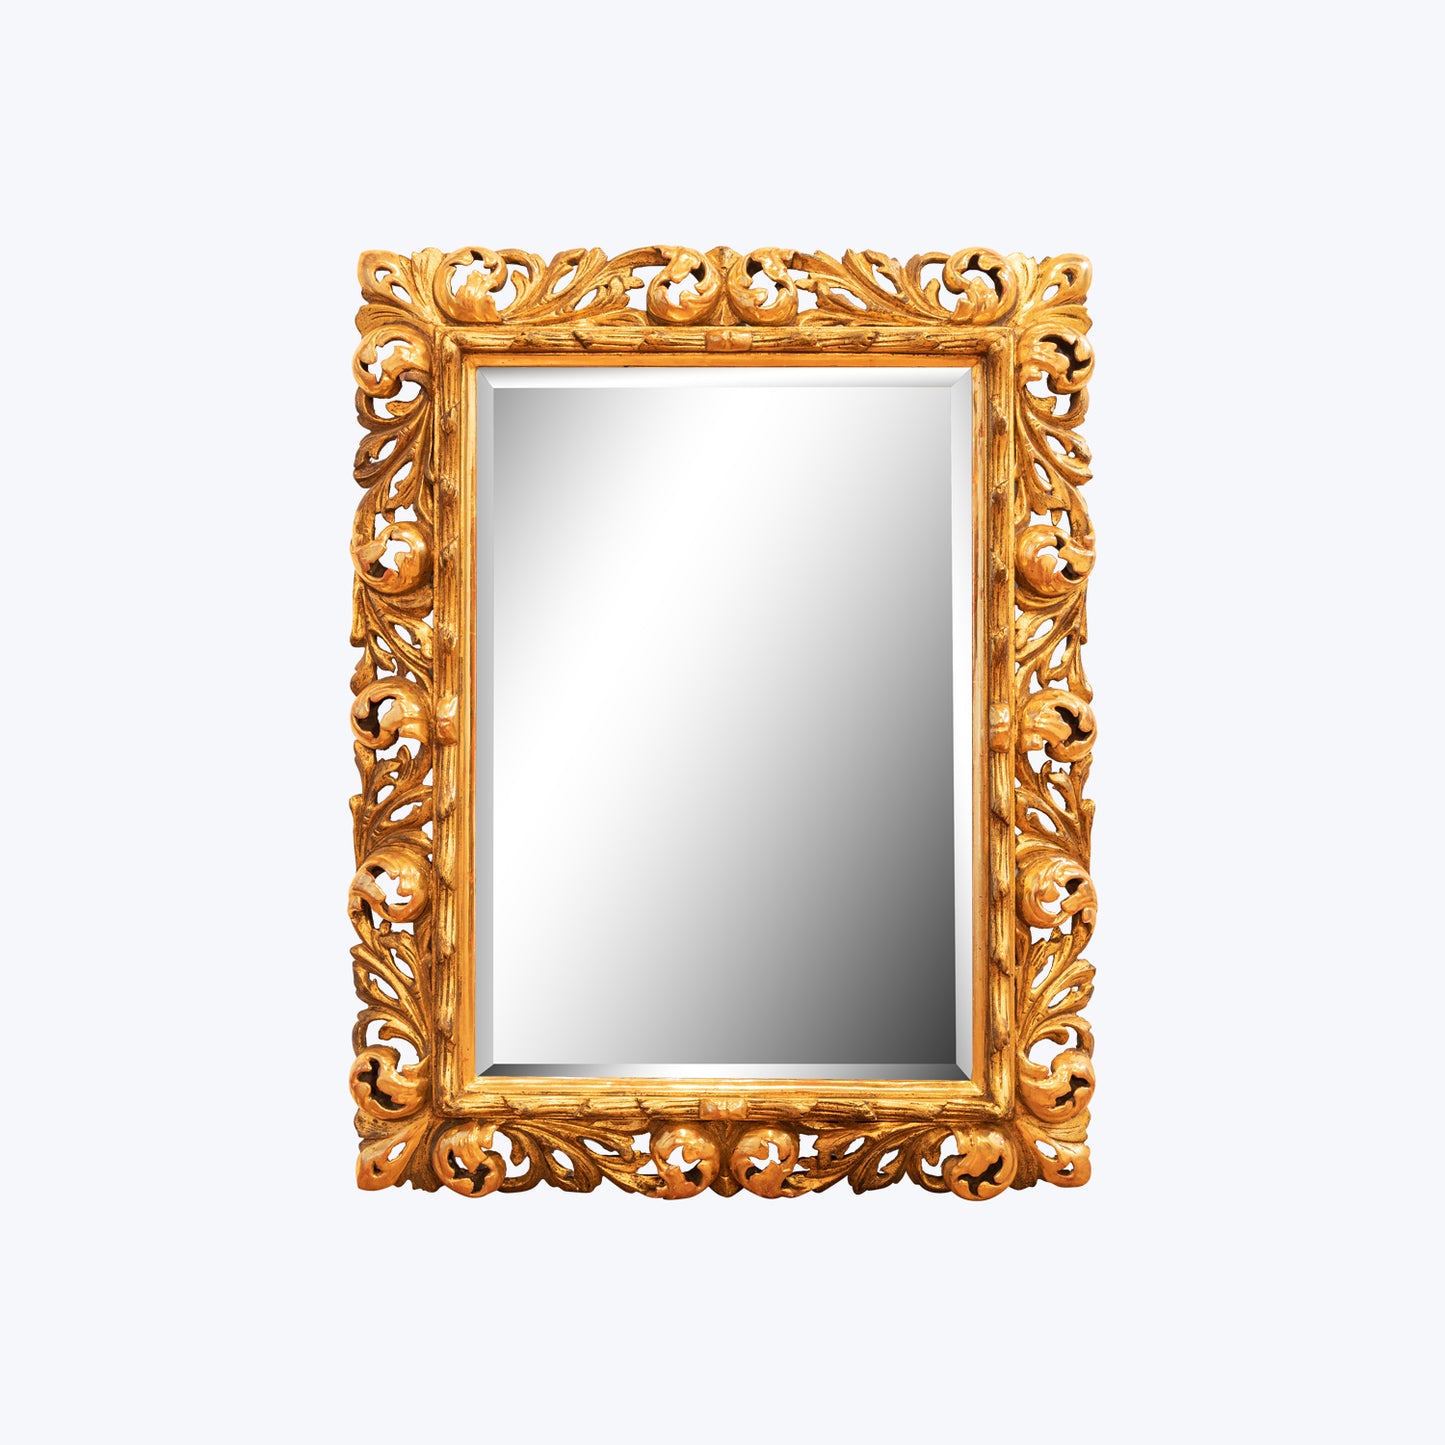 18th Century Victorian Mirror with Gold Leaf Ornate Frames